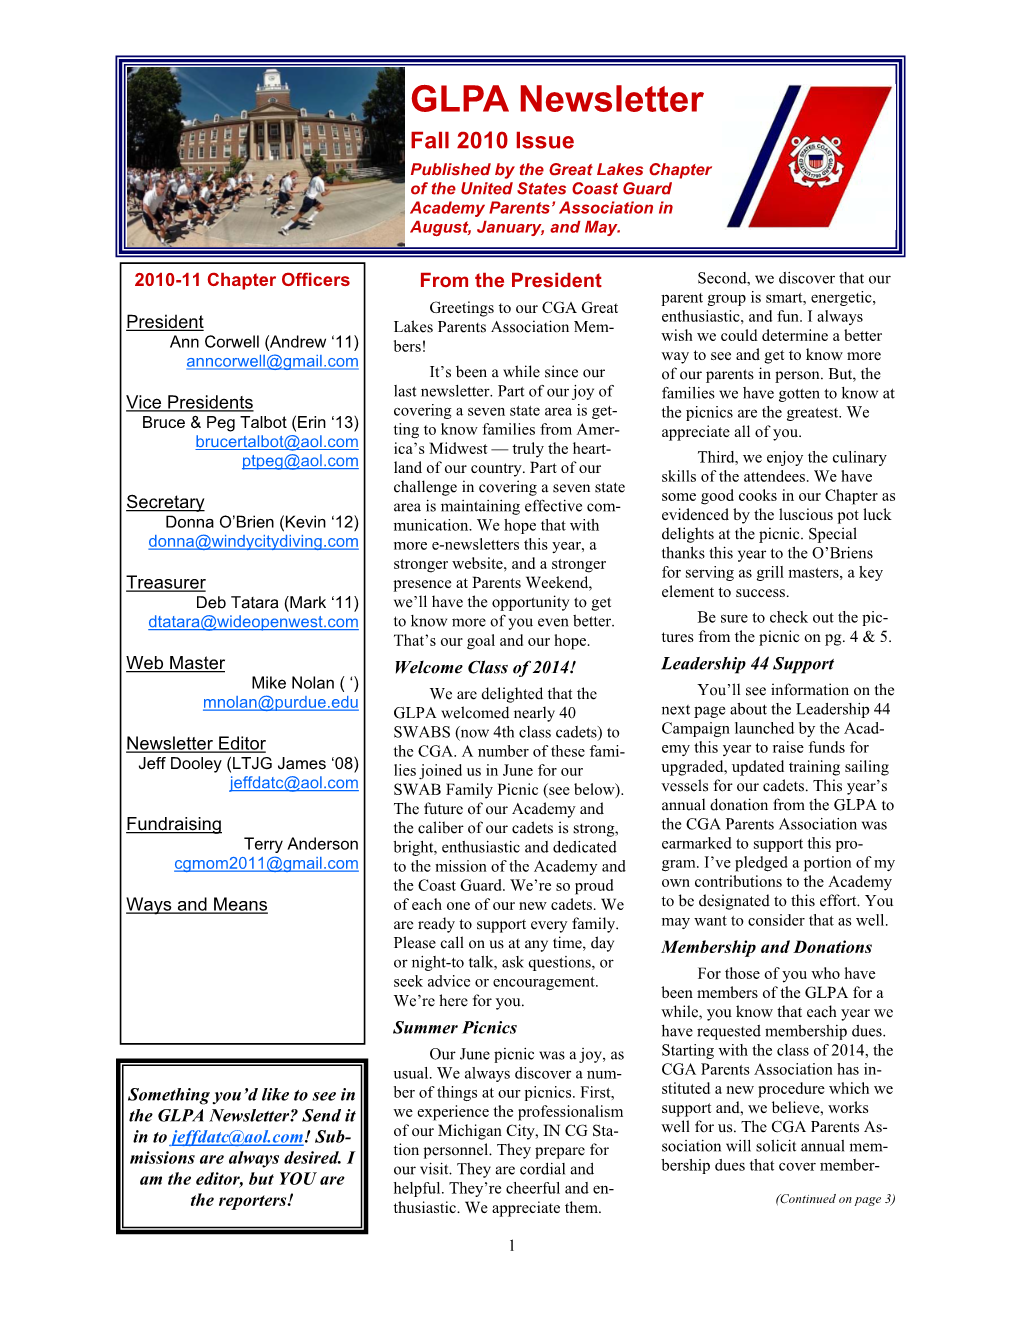 GLPA Newsletter Fall 2010 Issue Published by the Great Lakes Chapter of the United States Coast Guard Academy Parents’ Association in August, January, and May